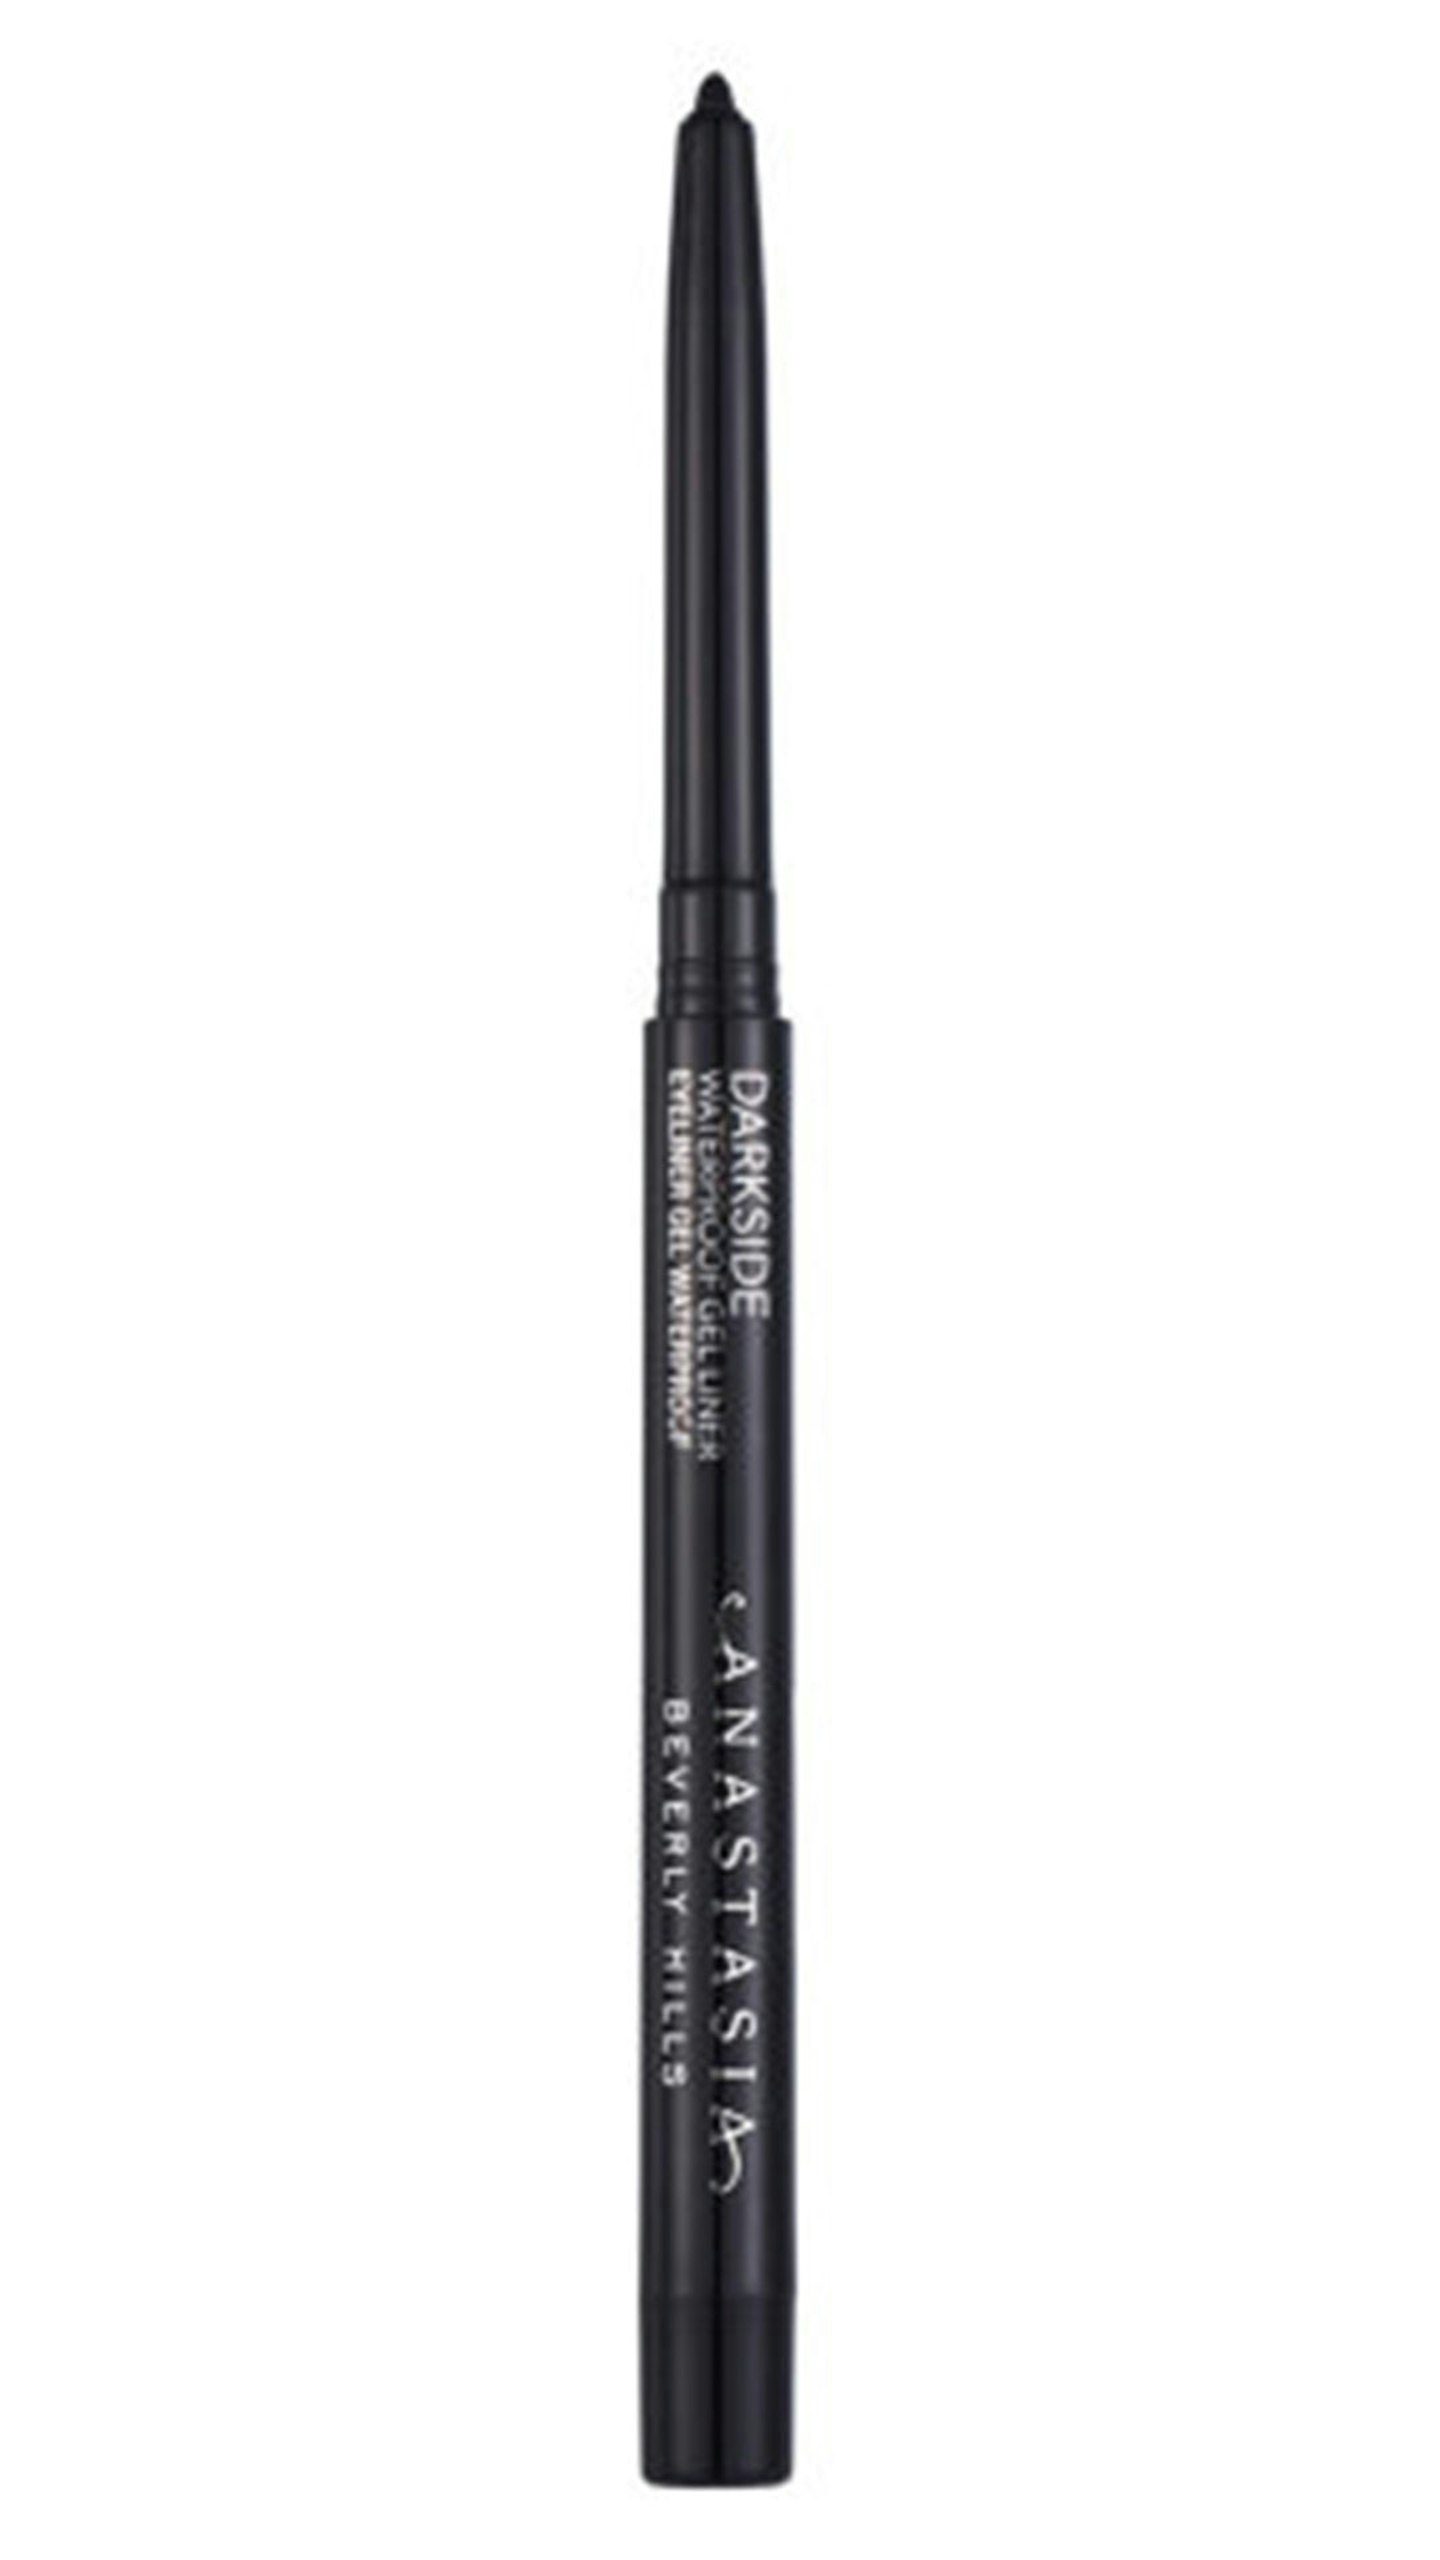 Eyeliners That Don't Budge